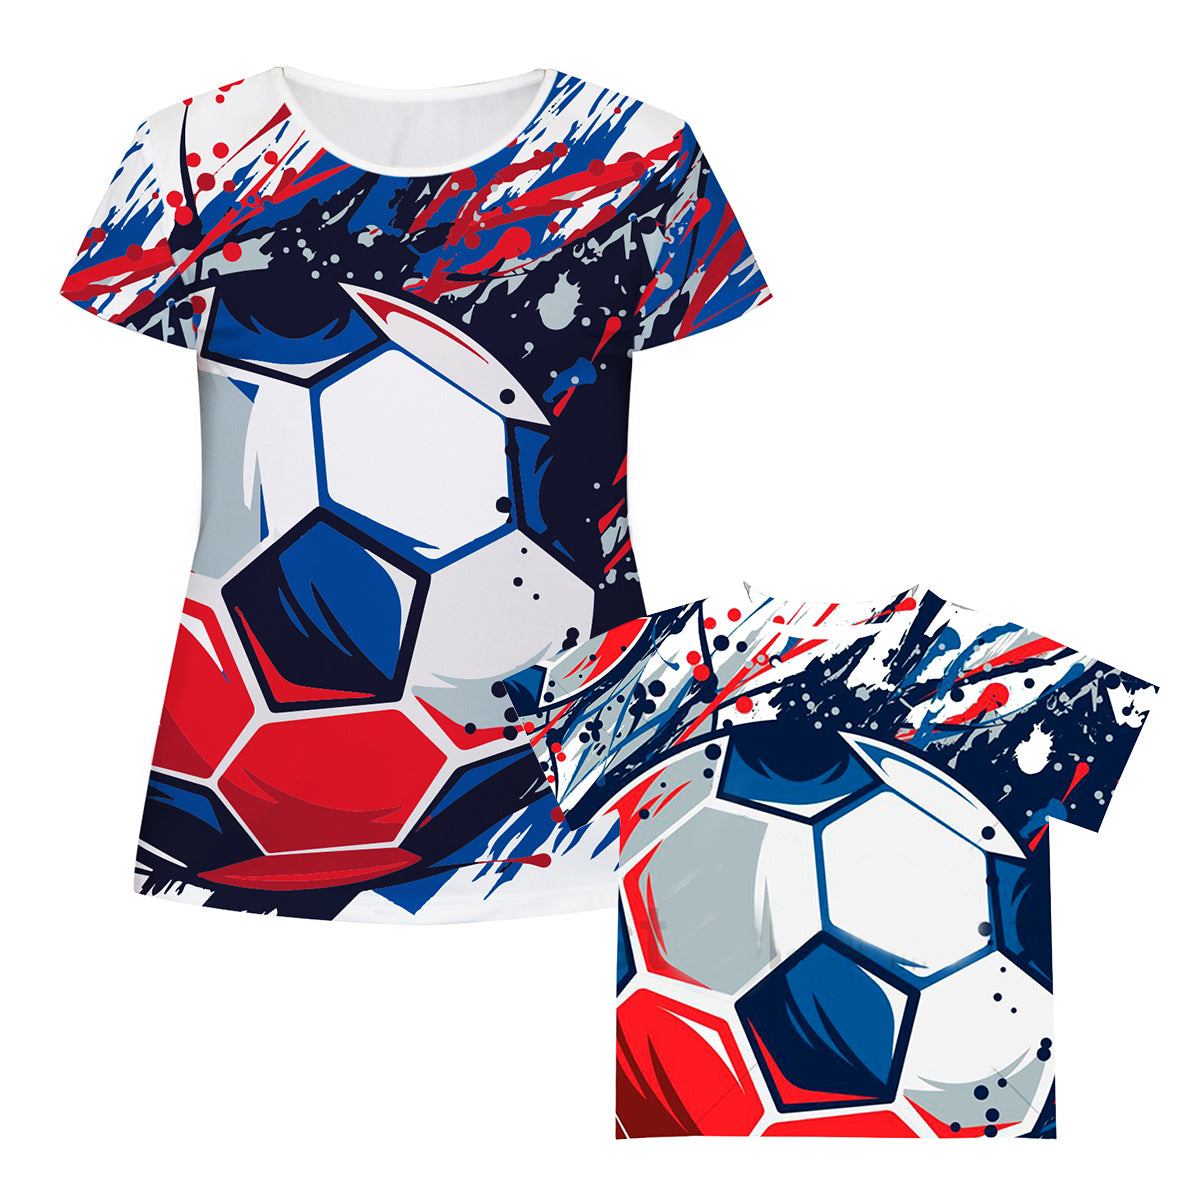 Soccer Ball White Blue and Red Short Sleeve Tee Shirt - Wimziy&Co.